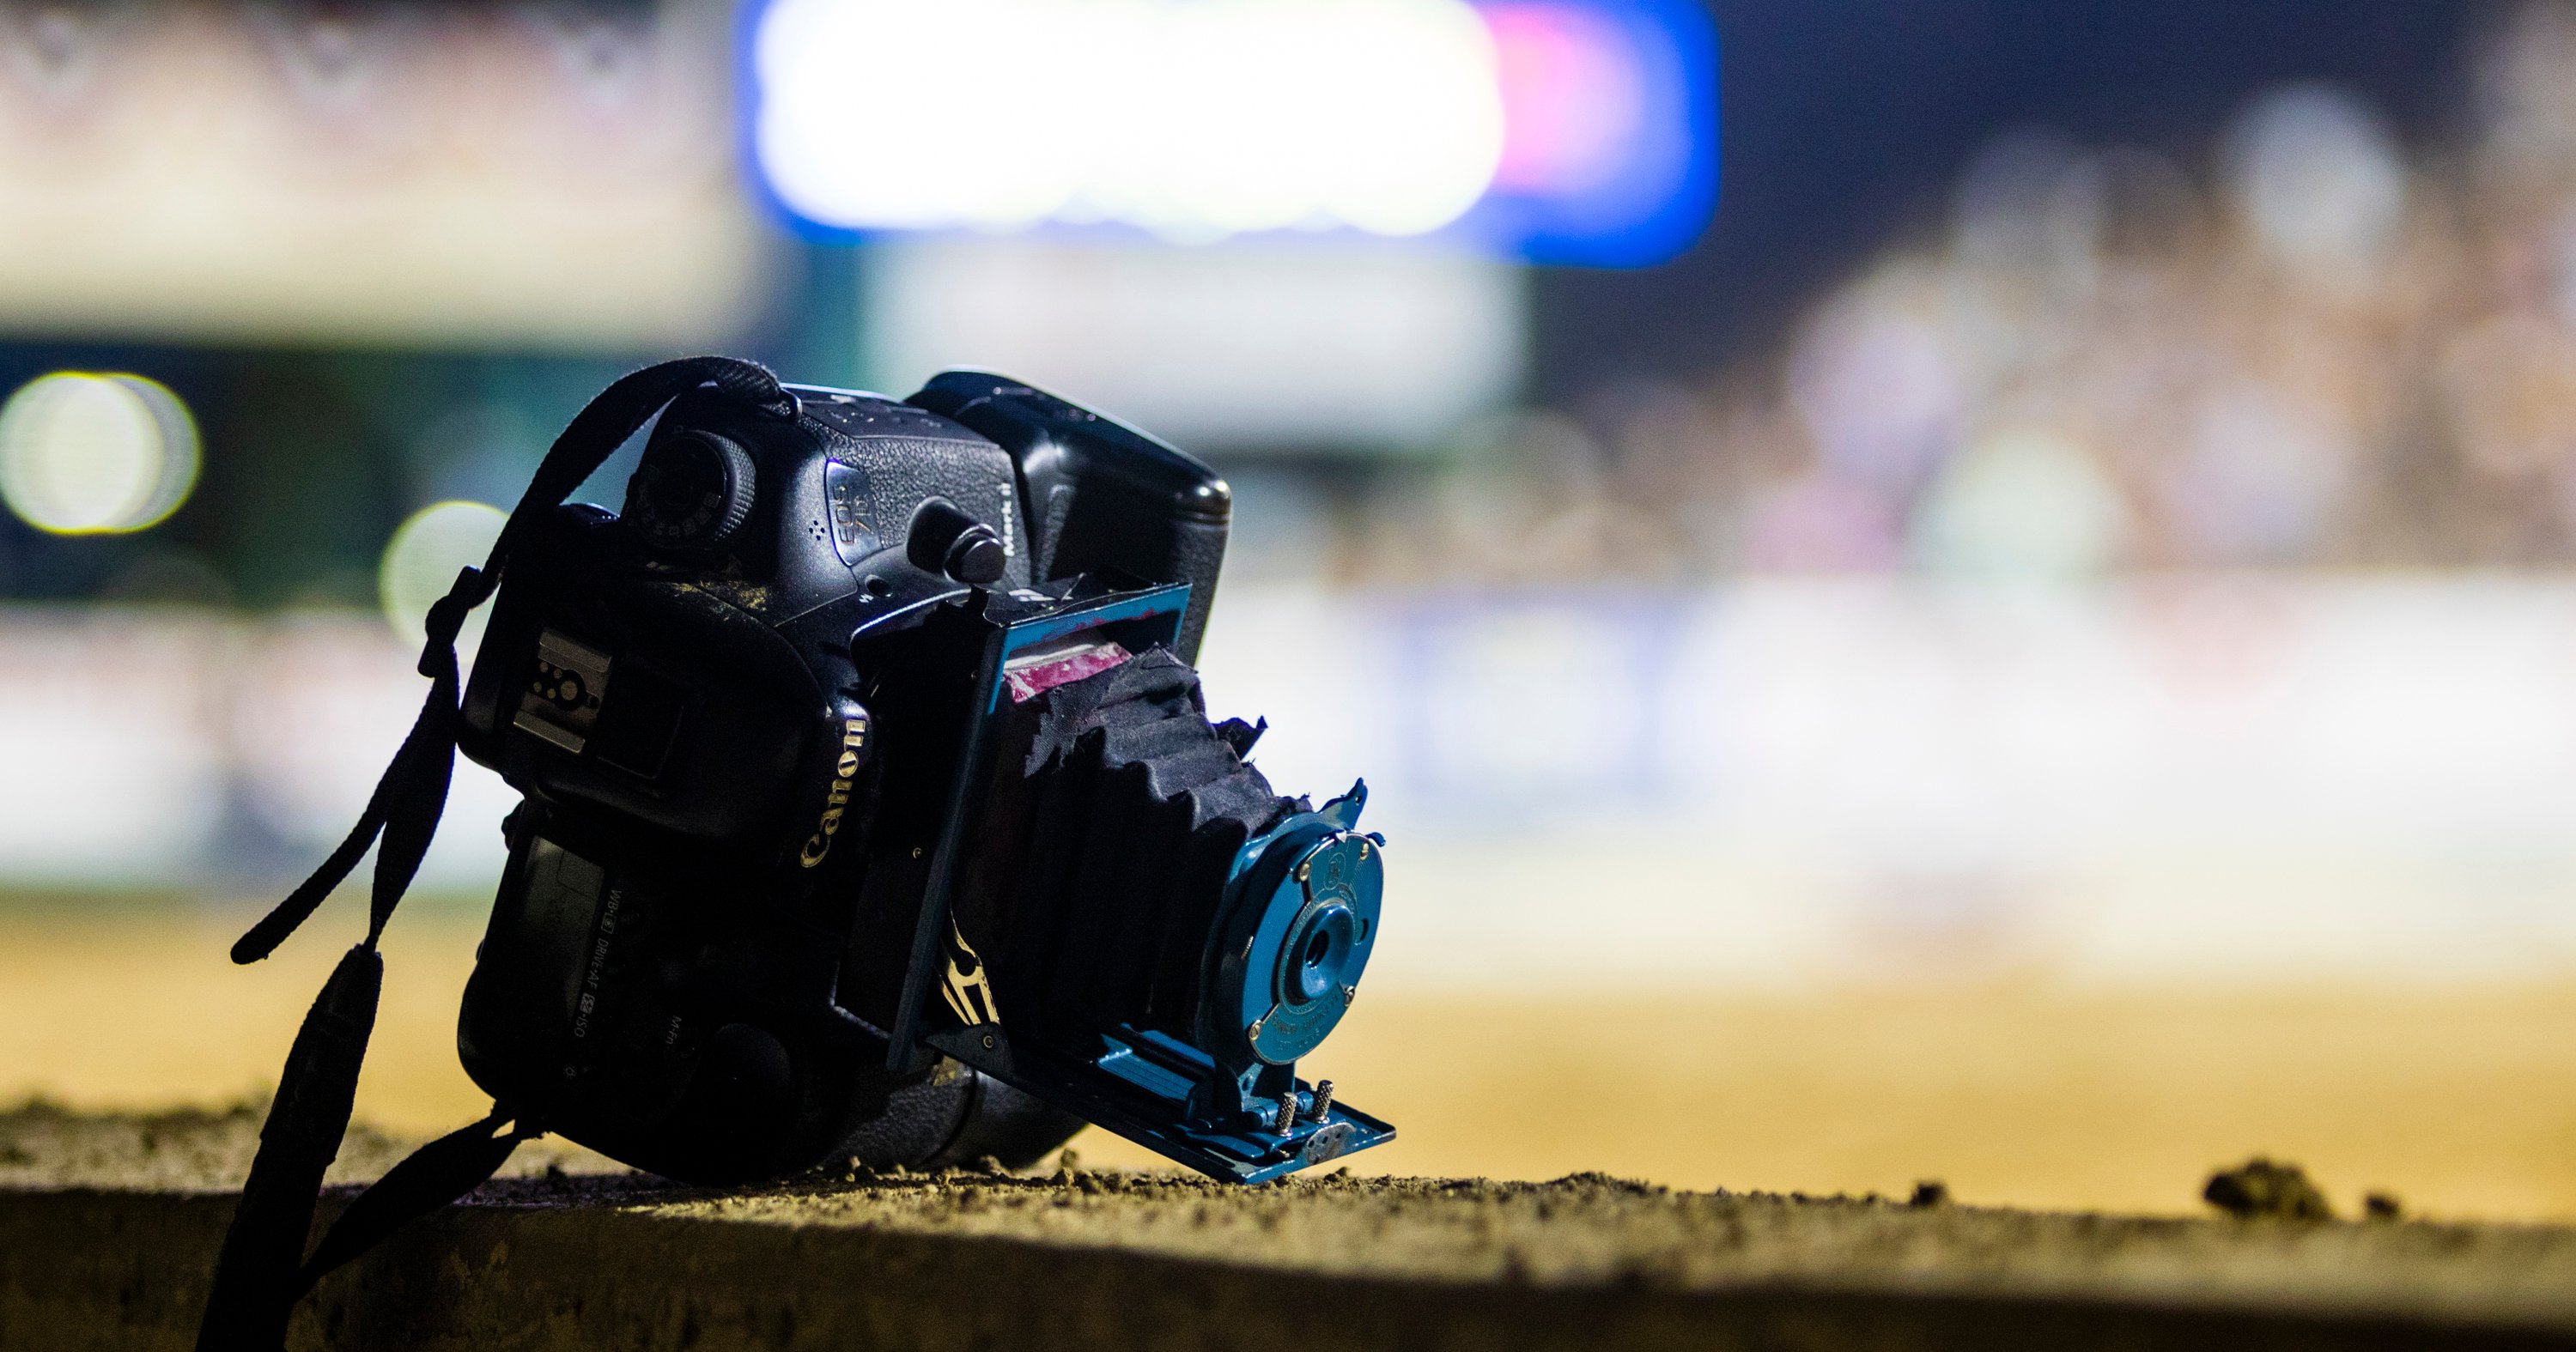 Capturing the Rodeo with a 100-Year-Old Kodak Lens on a Canon DSLR